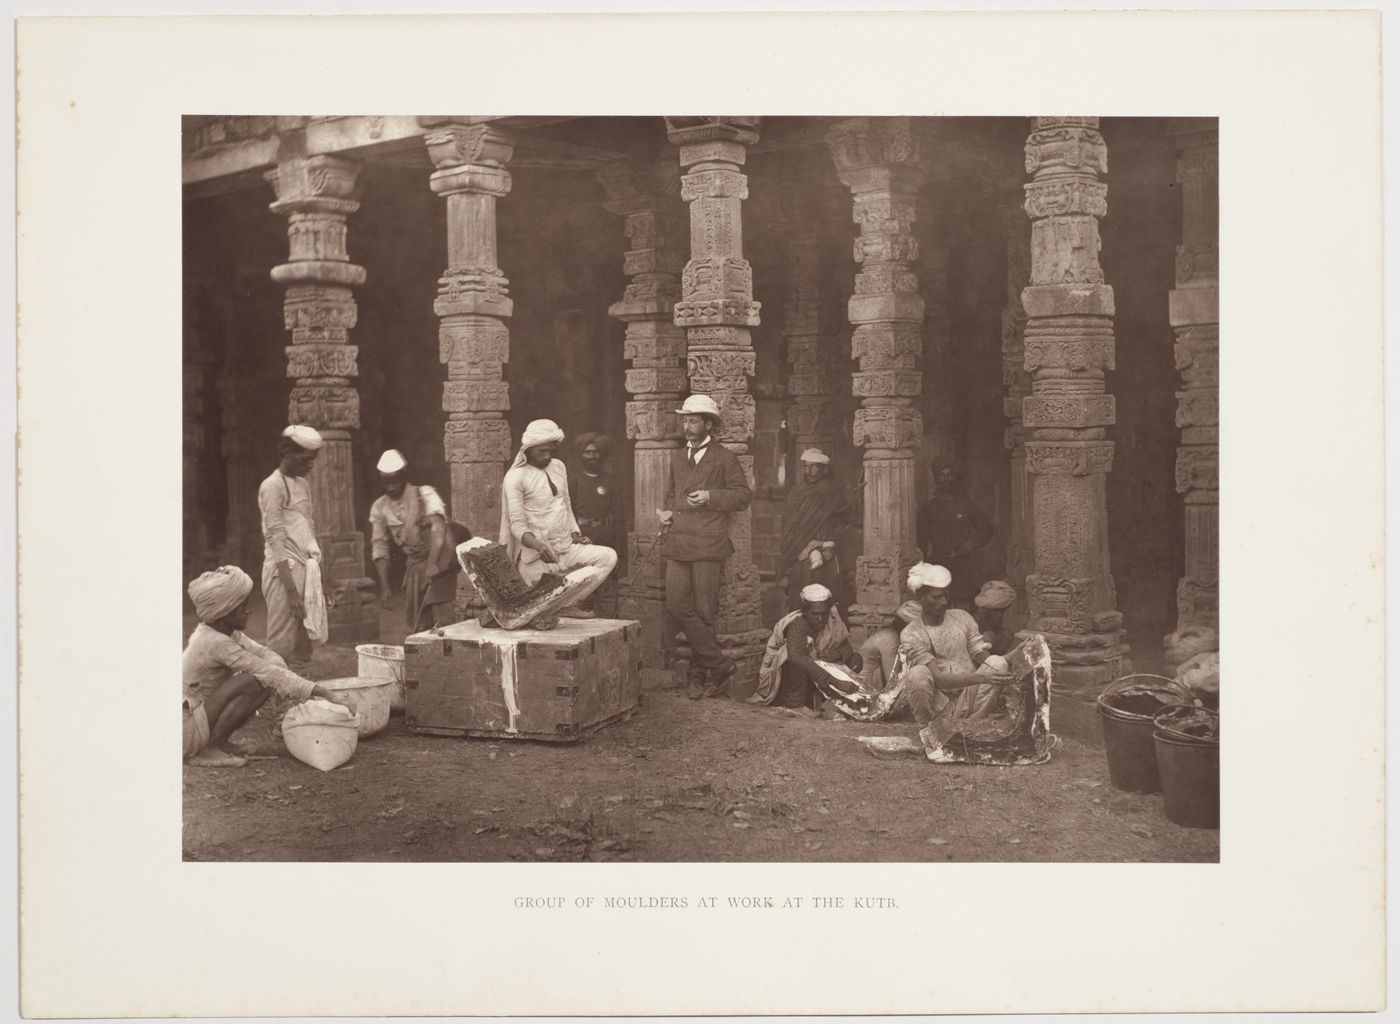 View of moulders working under supervision of Henry Hardy Cole, in the courtyard of the Quwwat al-Islam mosque, in the Qutb Minar complex, with colonnade in the background, Delhi, India